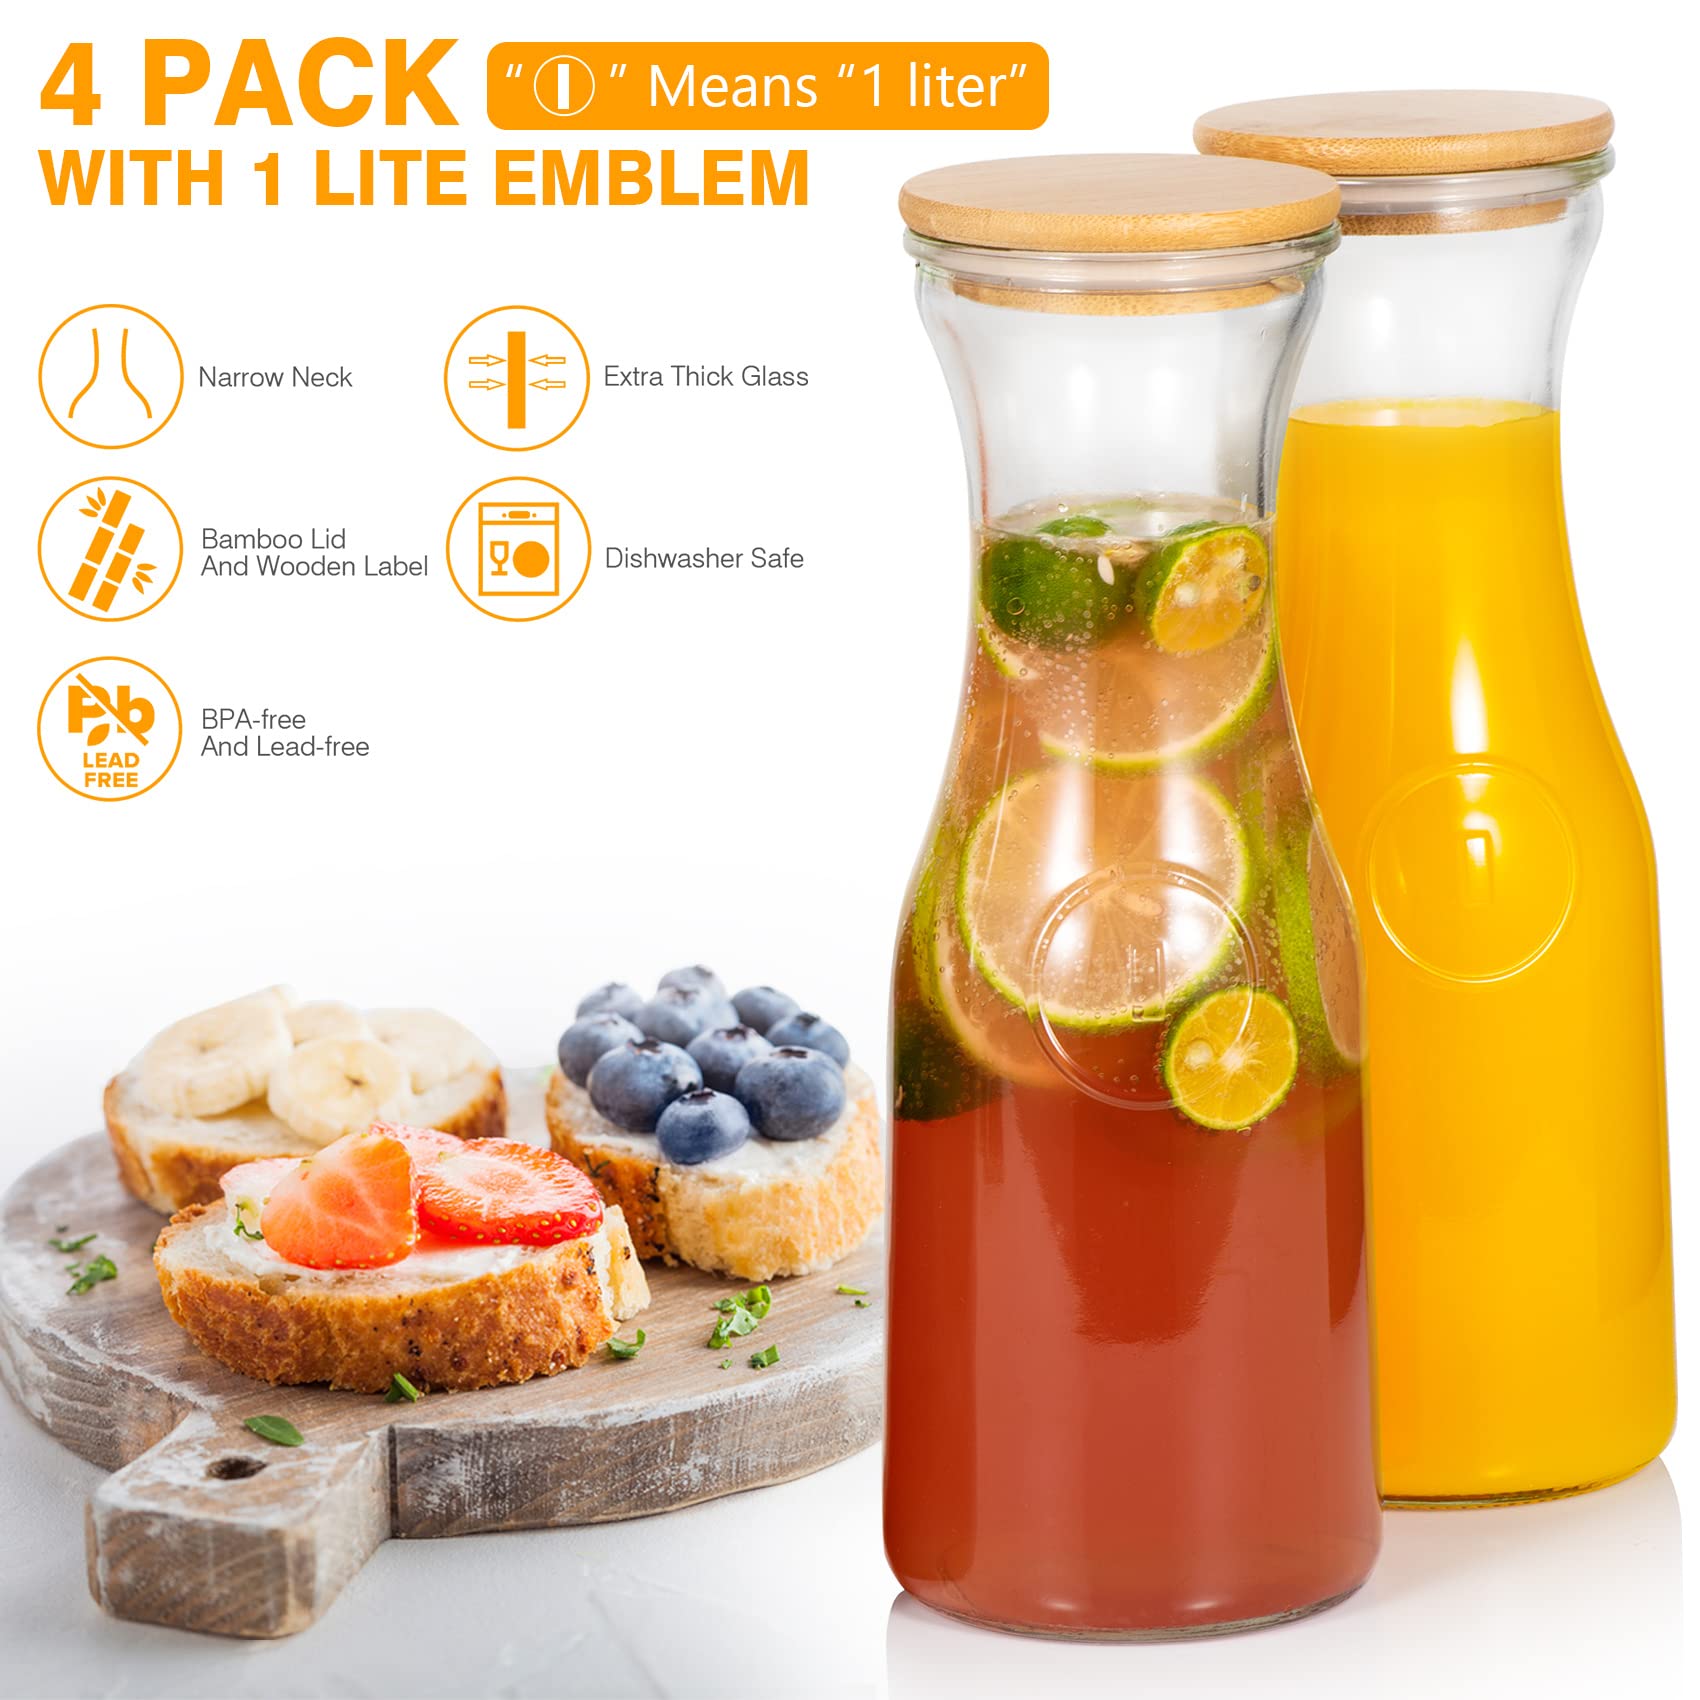 Glass Carafe Pitchers, Beverage Dispensers with Bamboo Lids and Tags, Clear Jugs For Mimosa Bar, Wine, Iced Tea, Lemonade, Milk and Juice, 35 oz, Set of 2